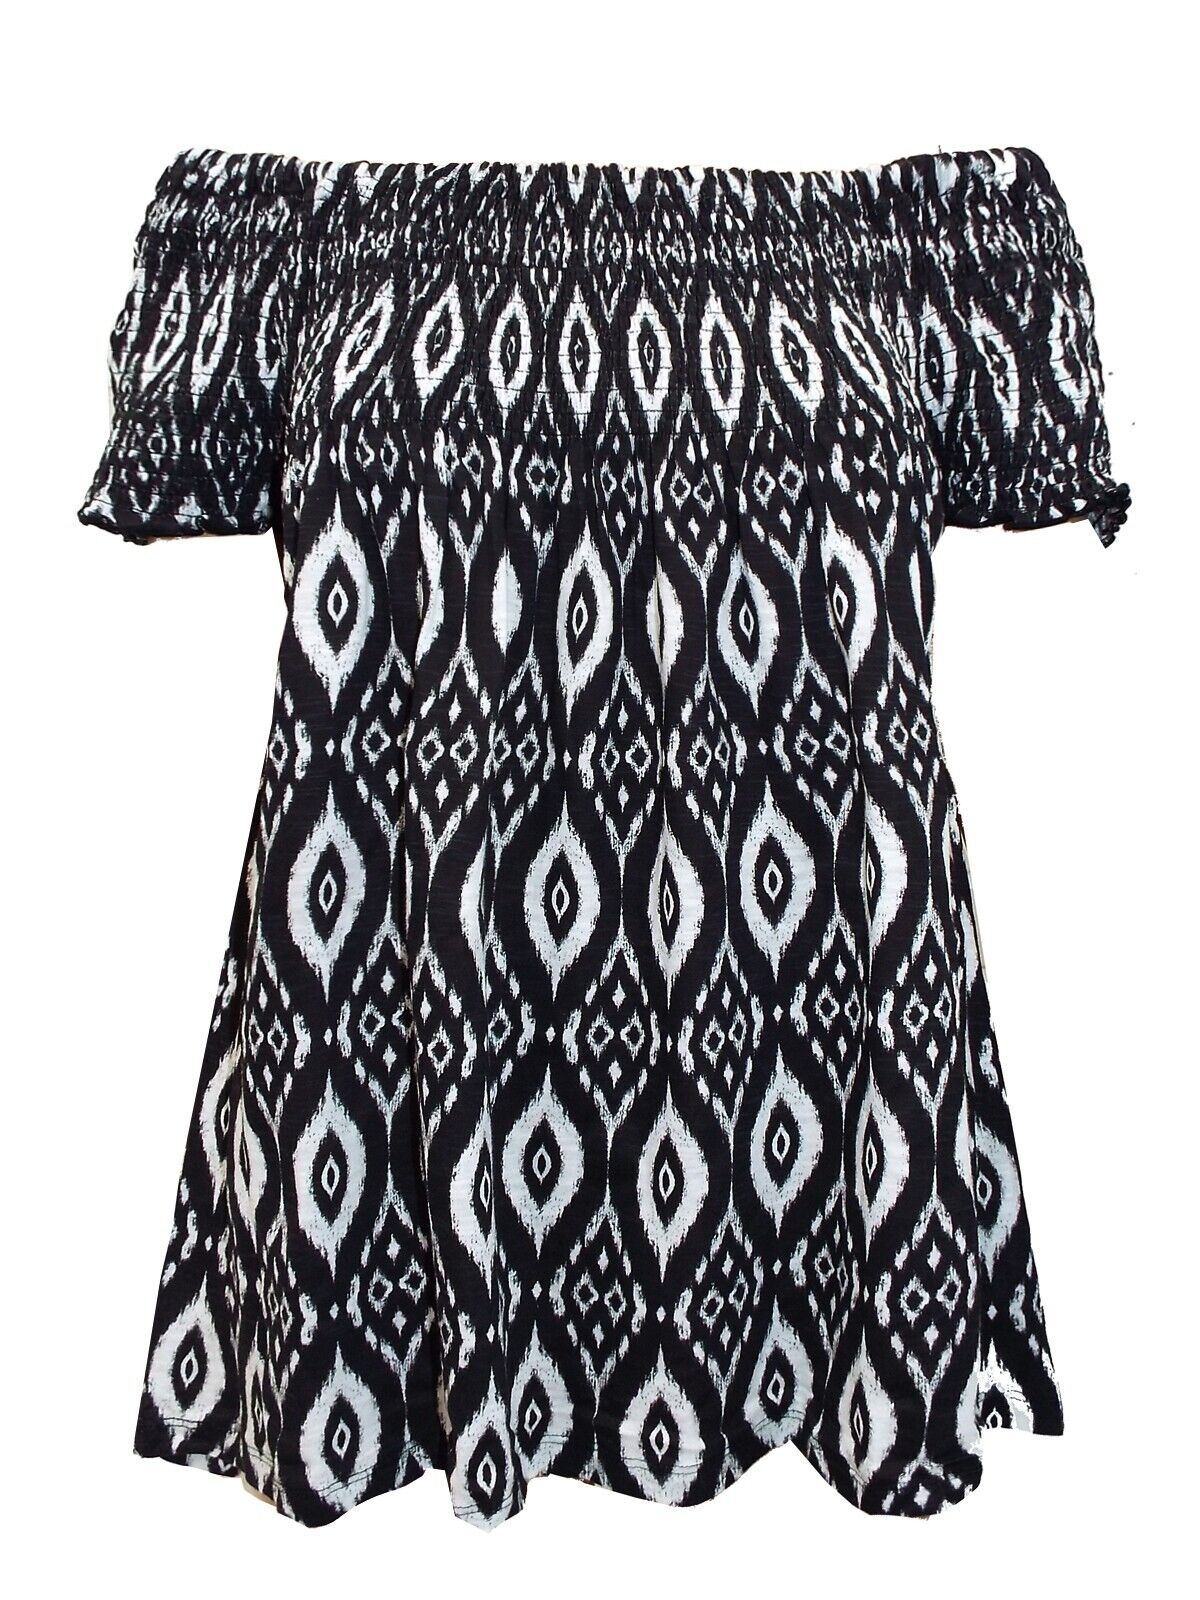 EX YOURS Black White IKAT Print Smock Bardot Jersey Top in Size 16